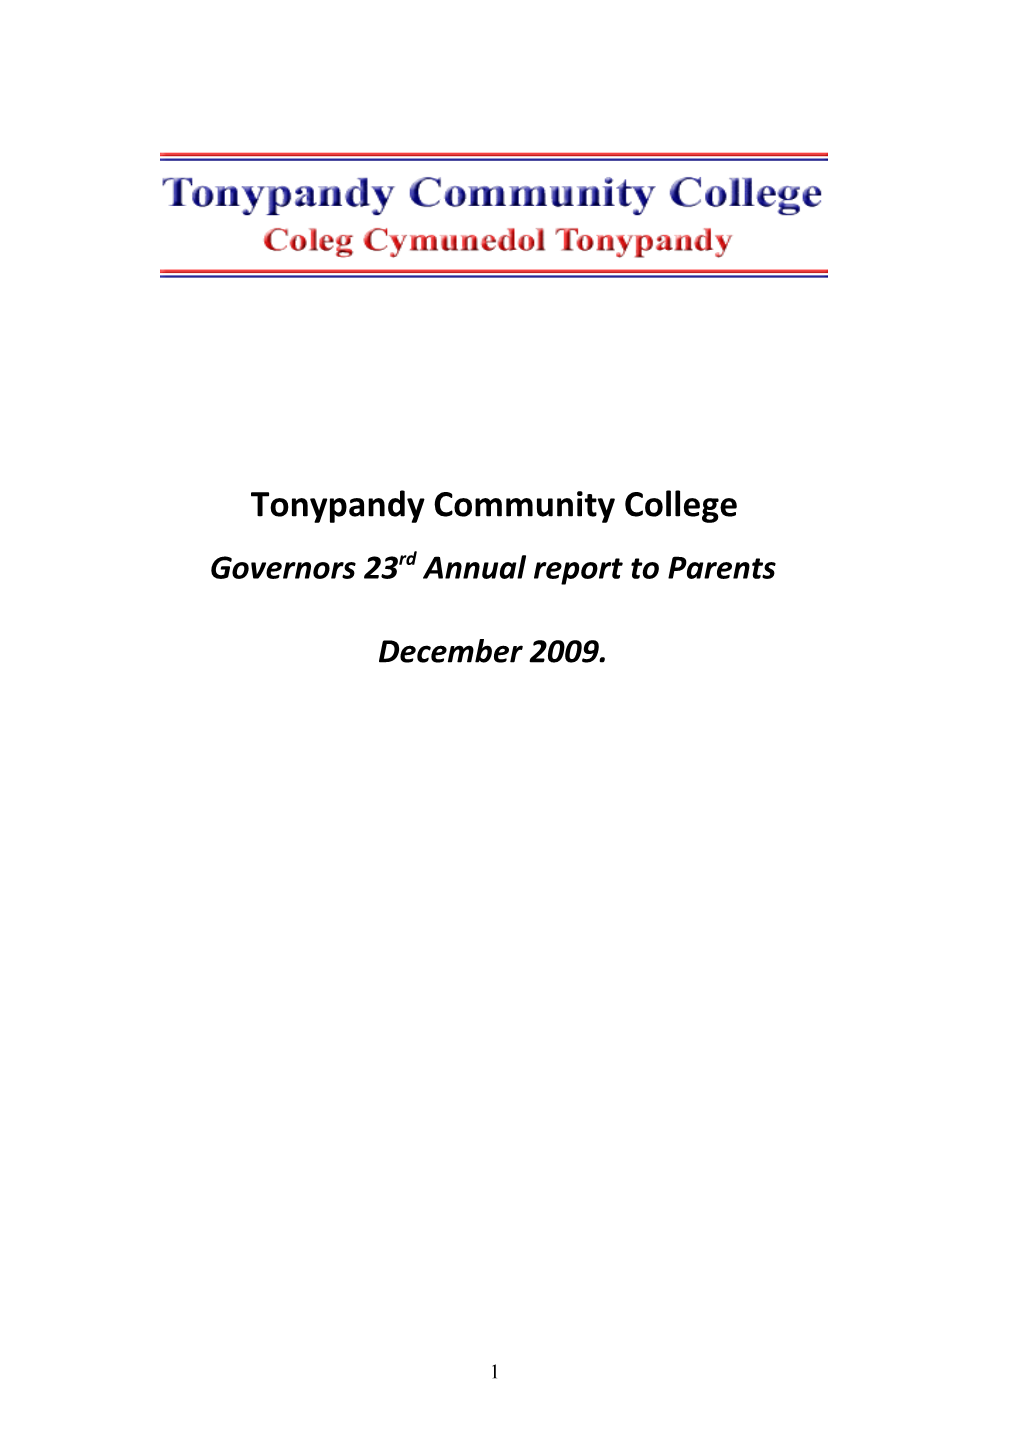 Governors 23Rd Annual Report to Parents